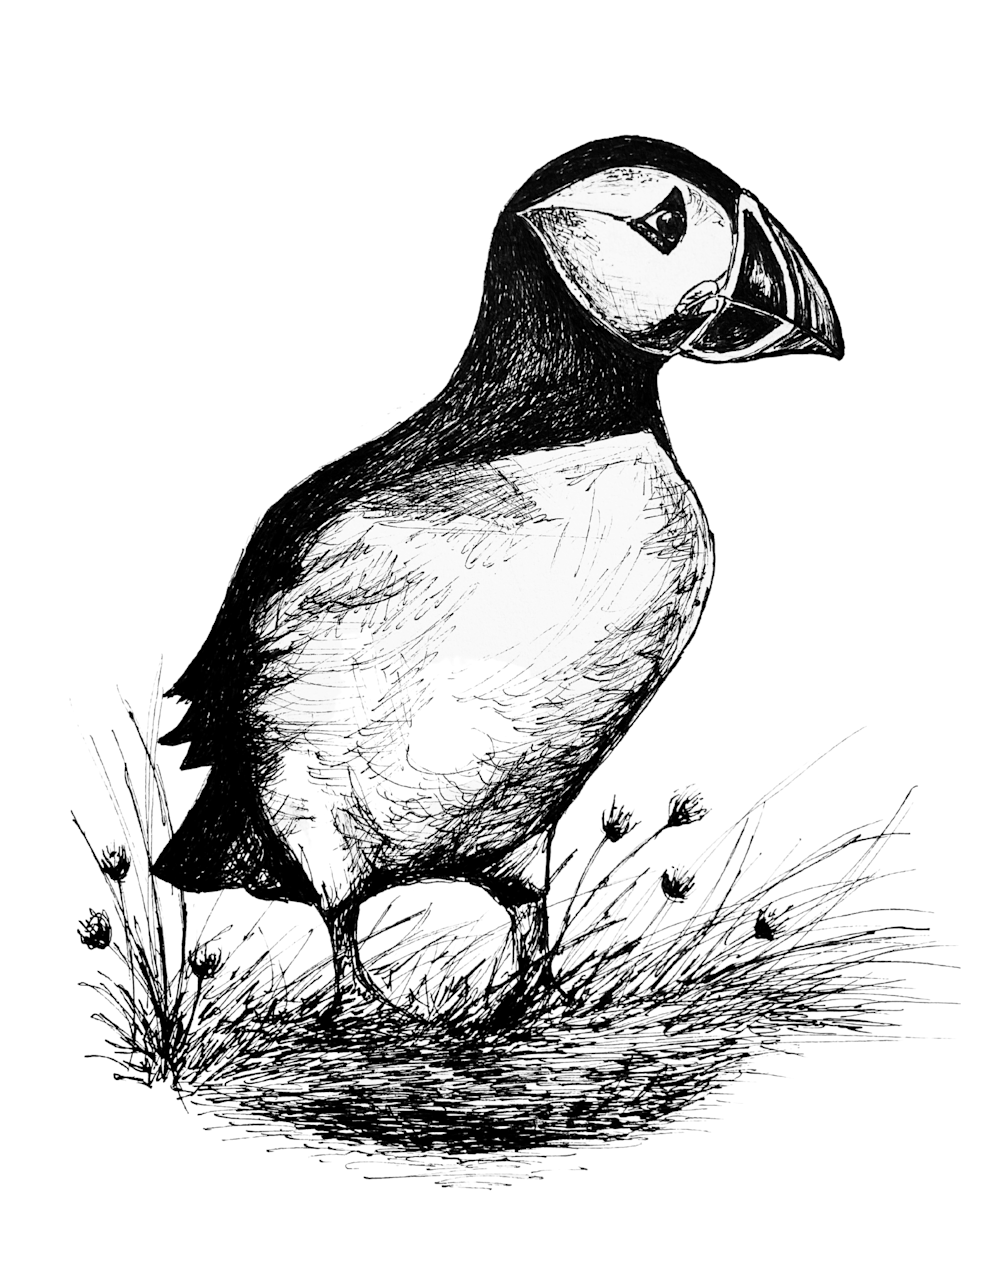 Puffin illustration in pen and ink by B.MacPherson